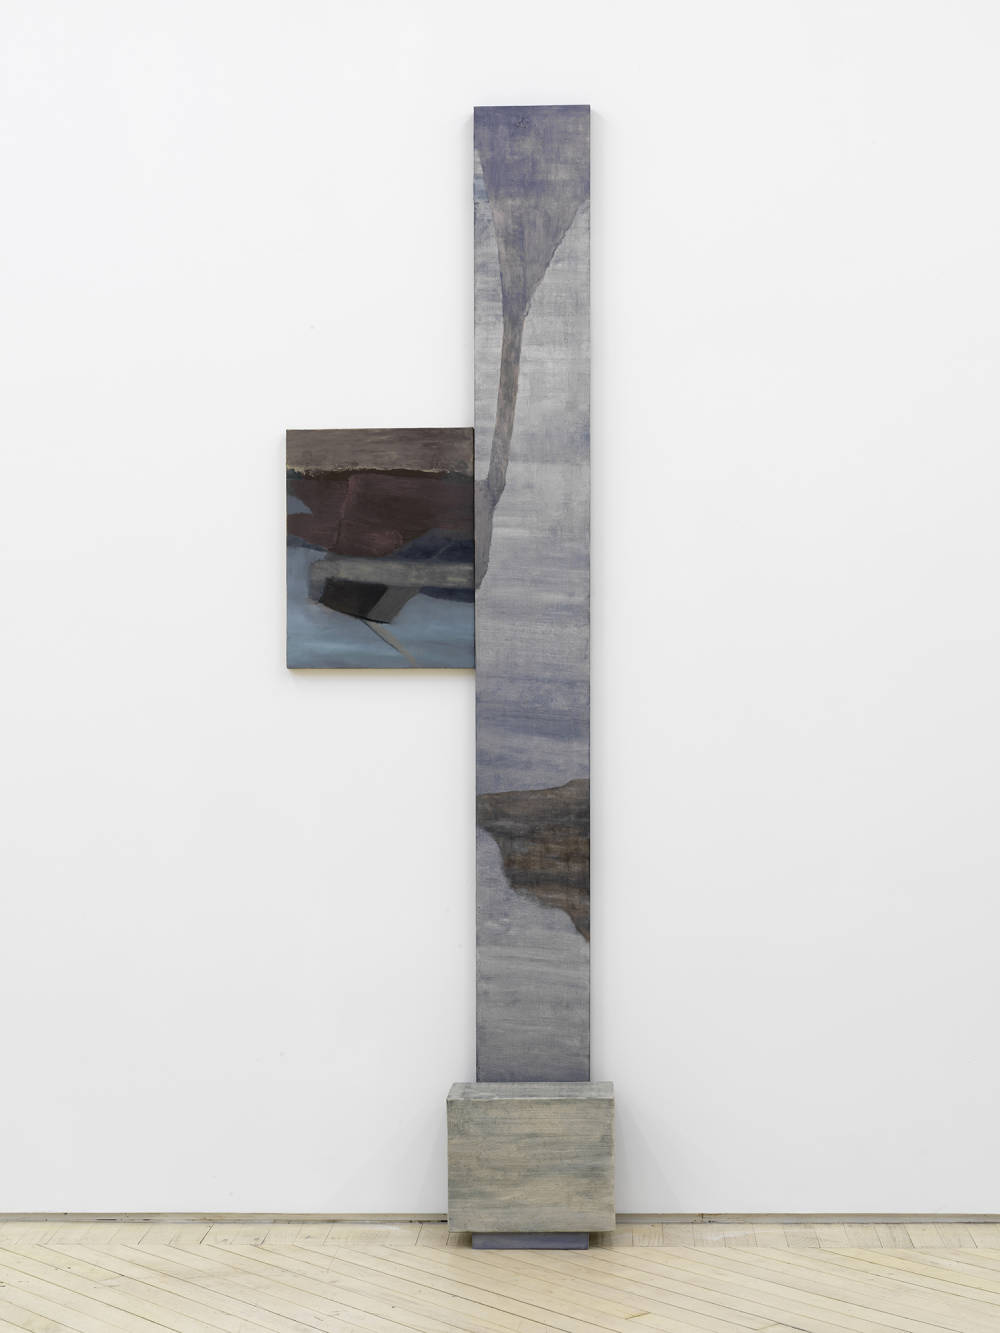 A vertical, abstract painting and sculpture leaning against a gallery wall.